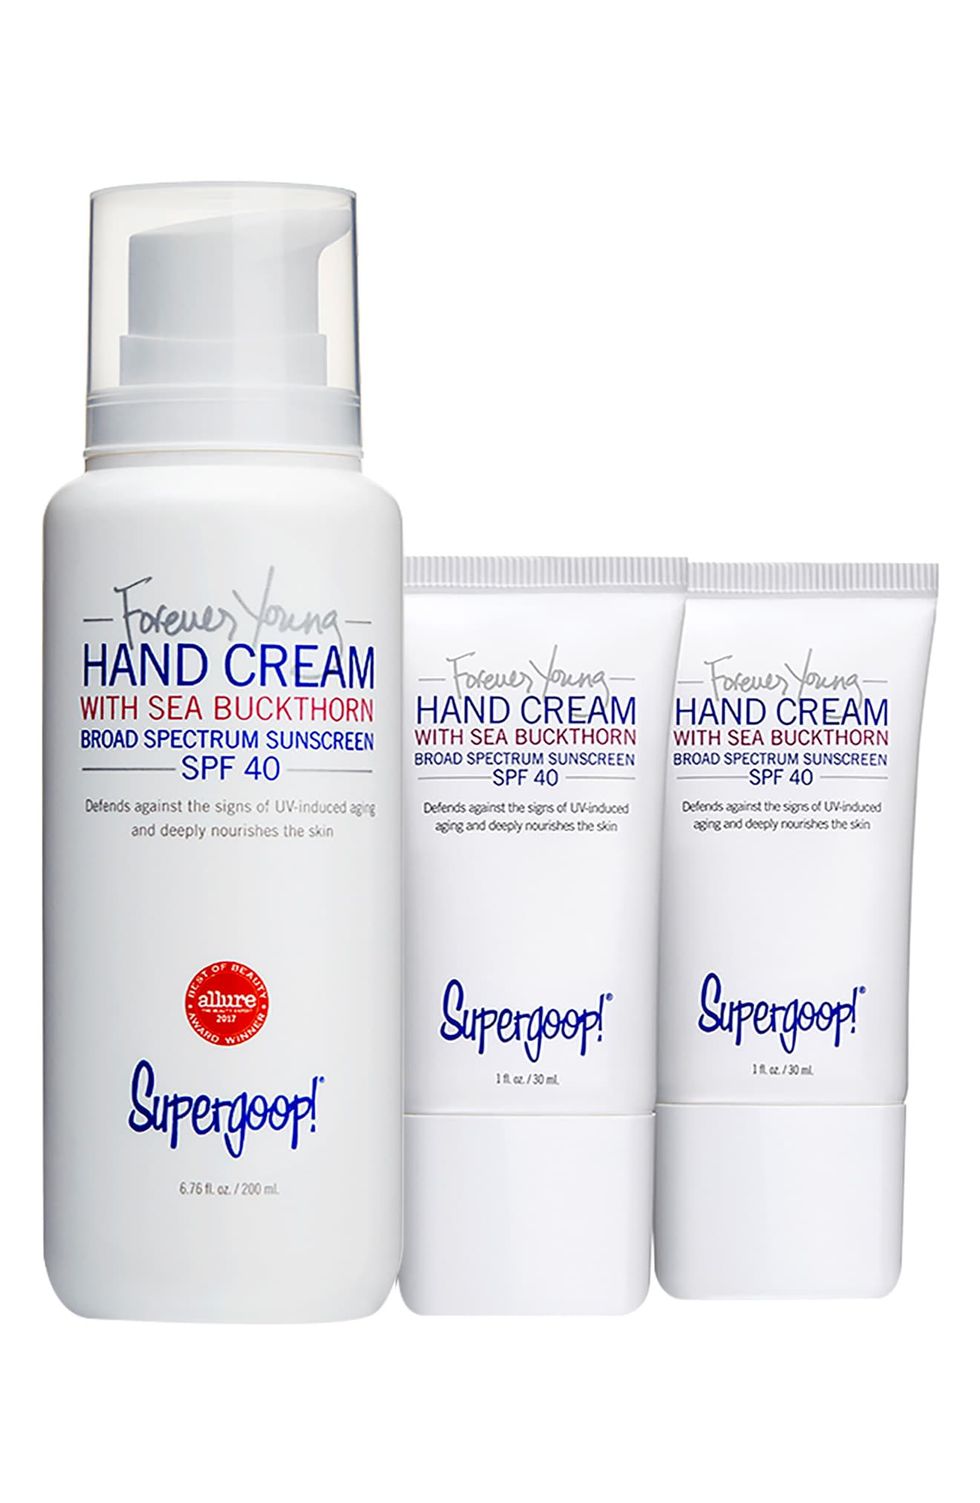 Supergoop! Forever Young Hand Cream with Sea Buckthorn SPF 40 Trio